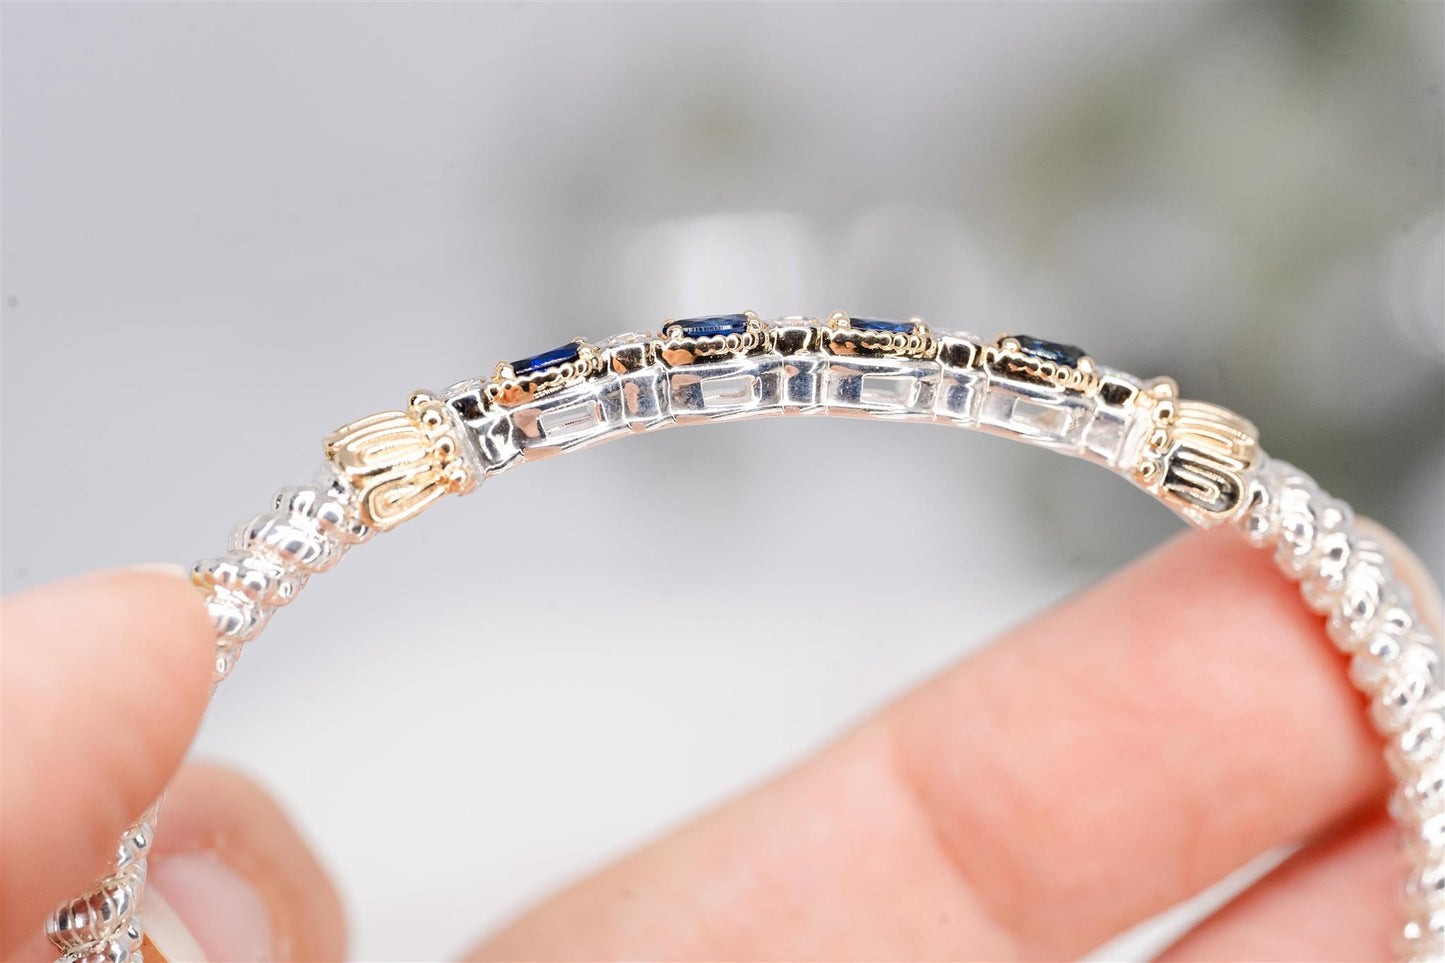 14K Yellow Gold and Sterling Silver Bracelet with Blue Sapphires and White Diamonds